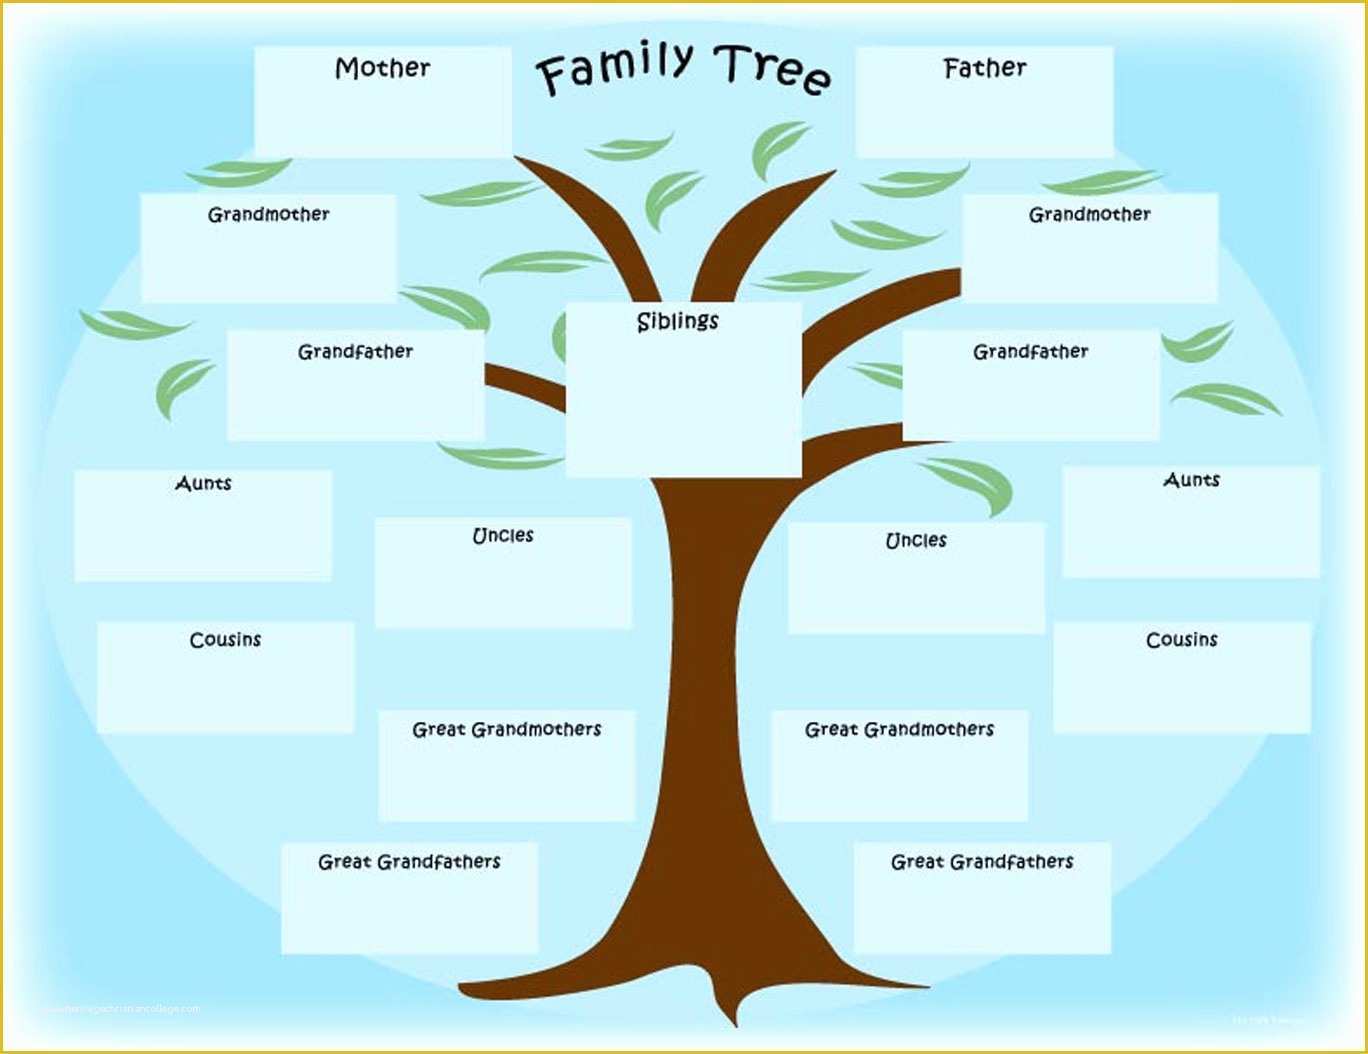 Family Tree Maker Templates Free Download Of Family Tree Maker Templates Beepmunk